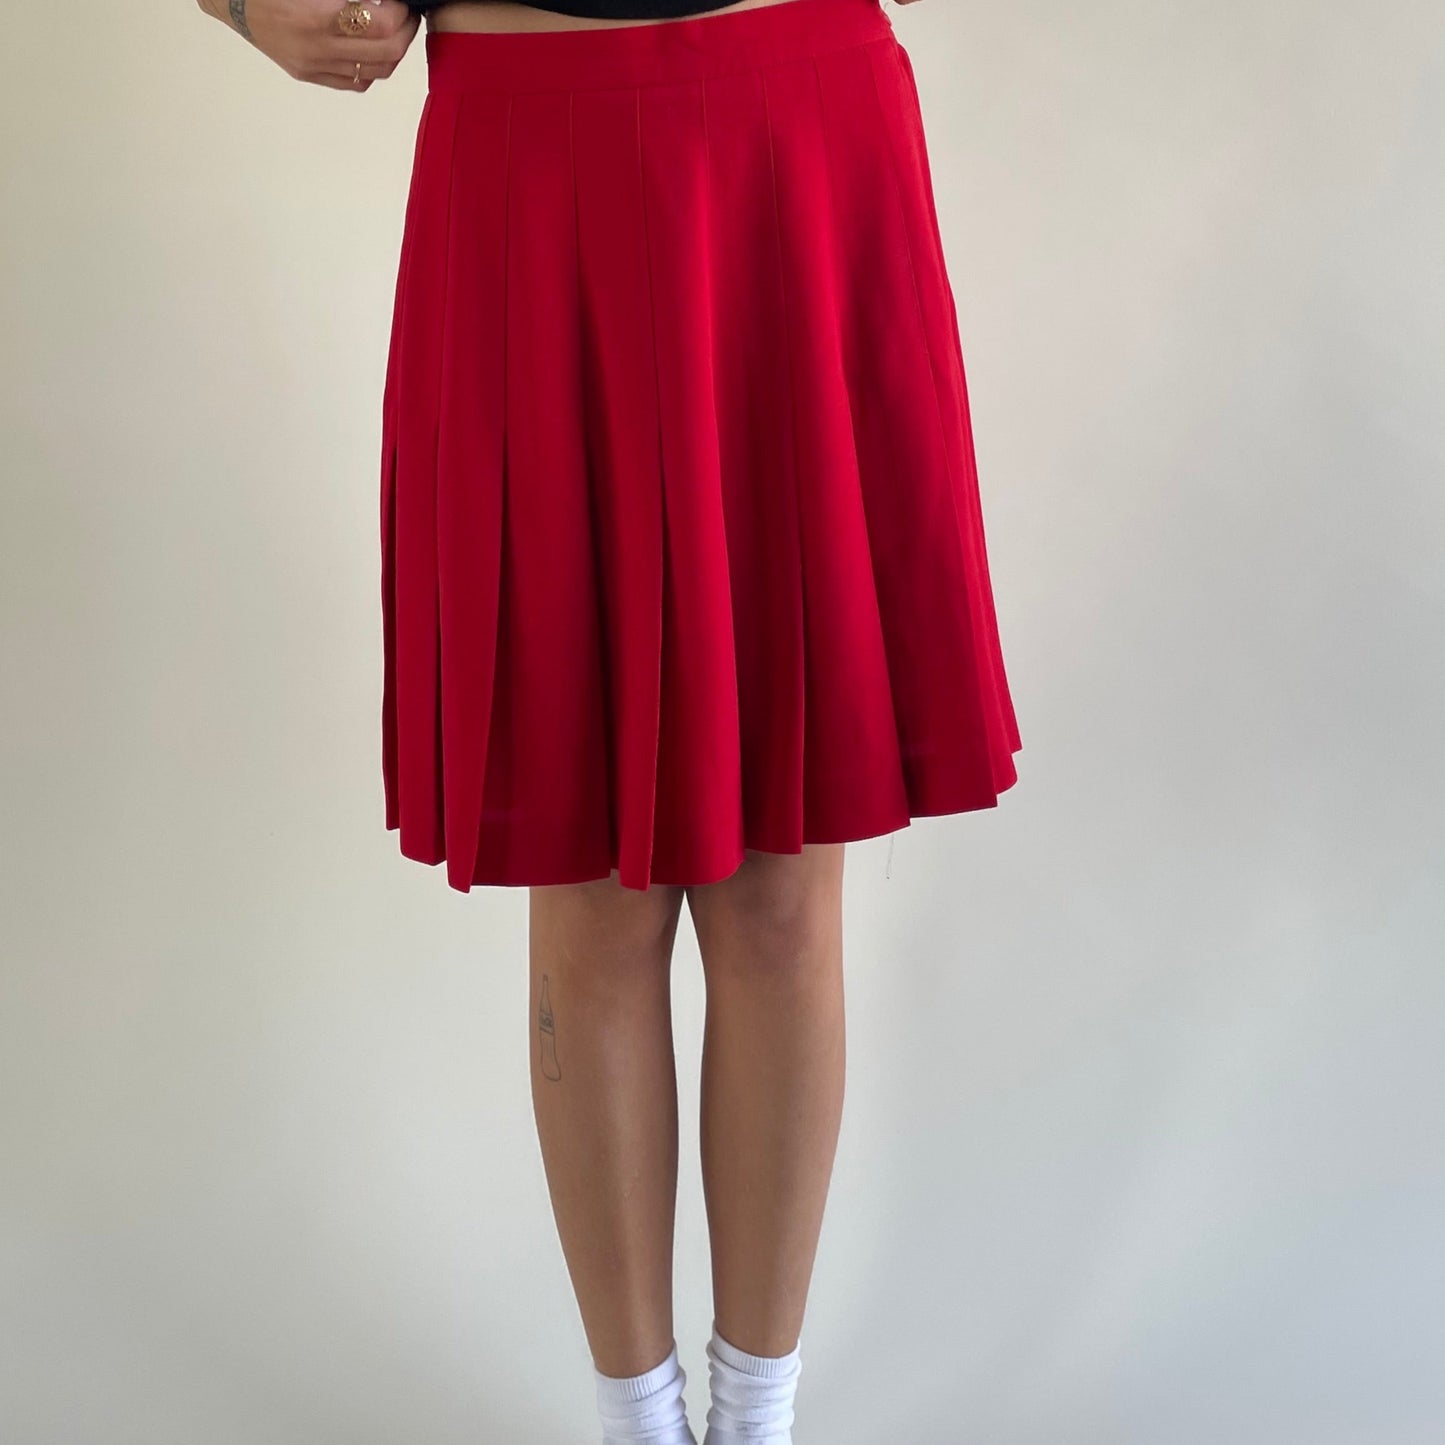 express red pleated skirt